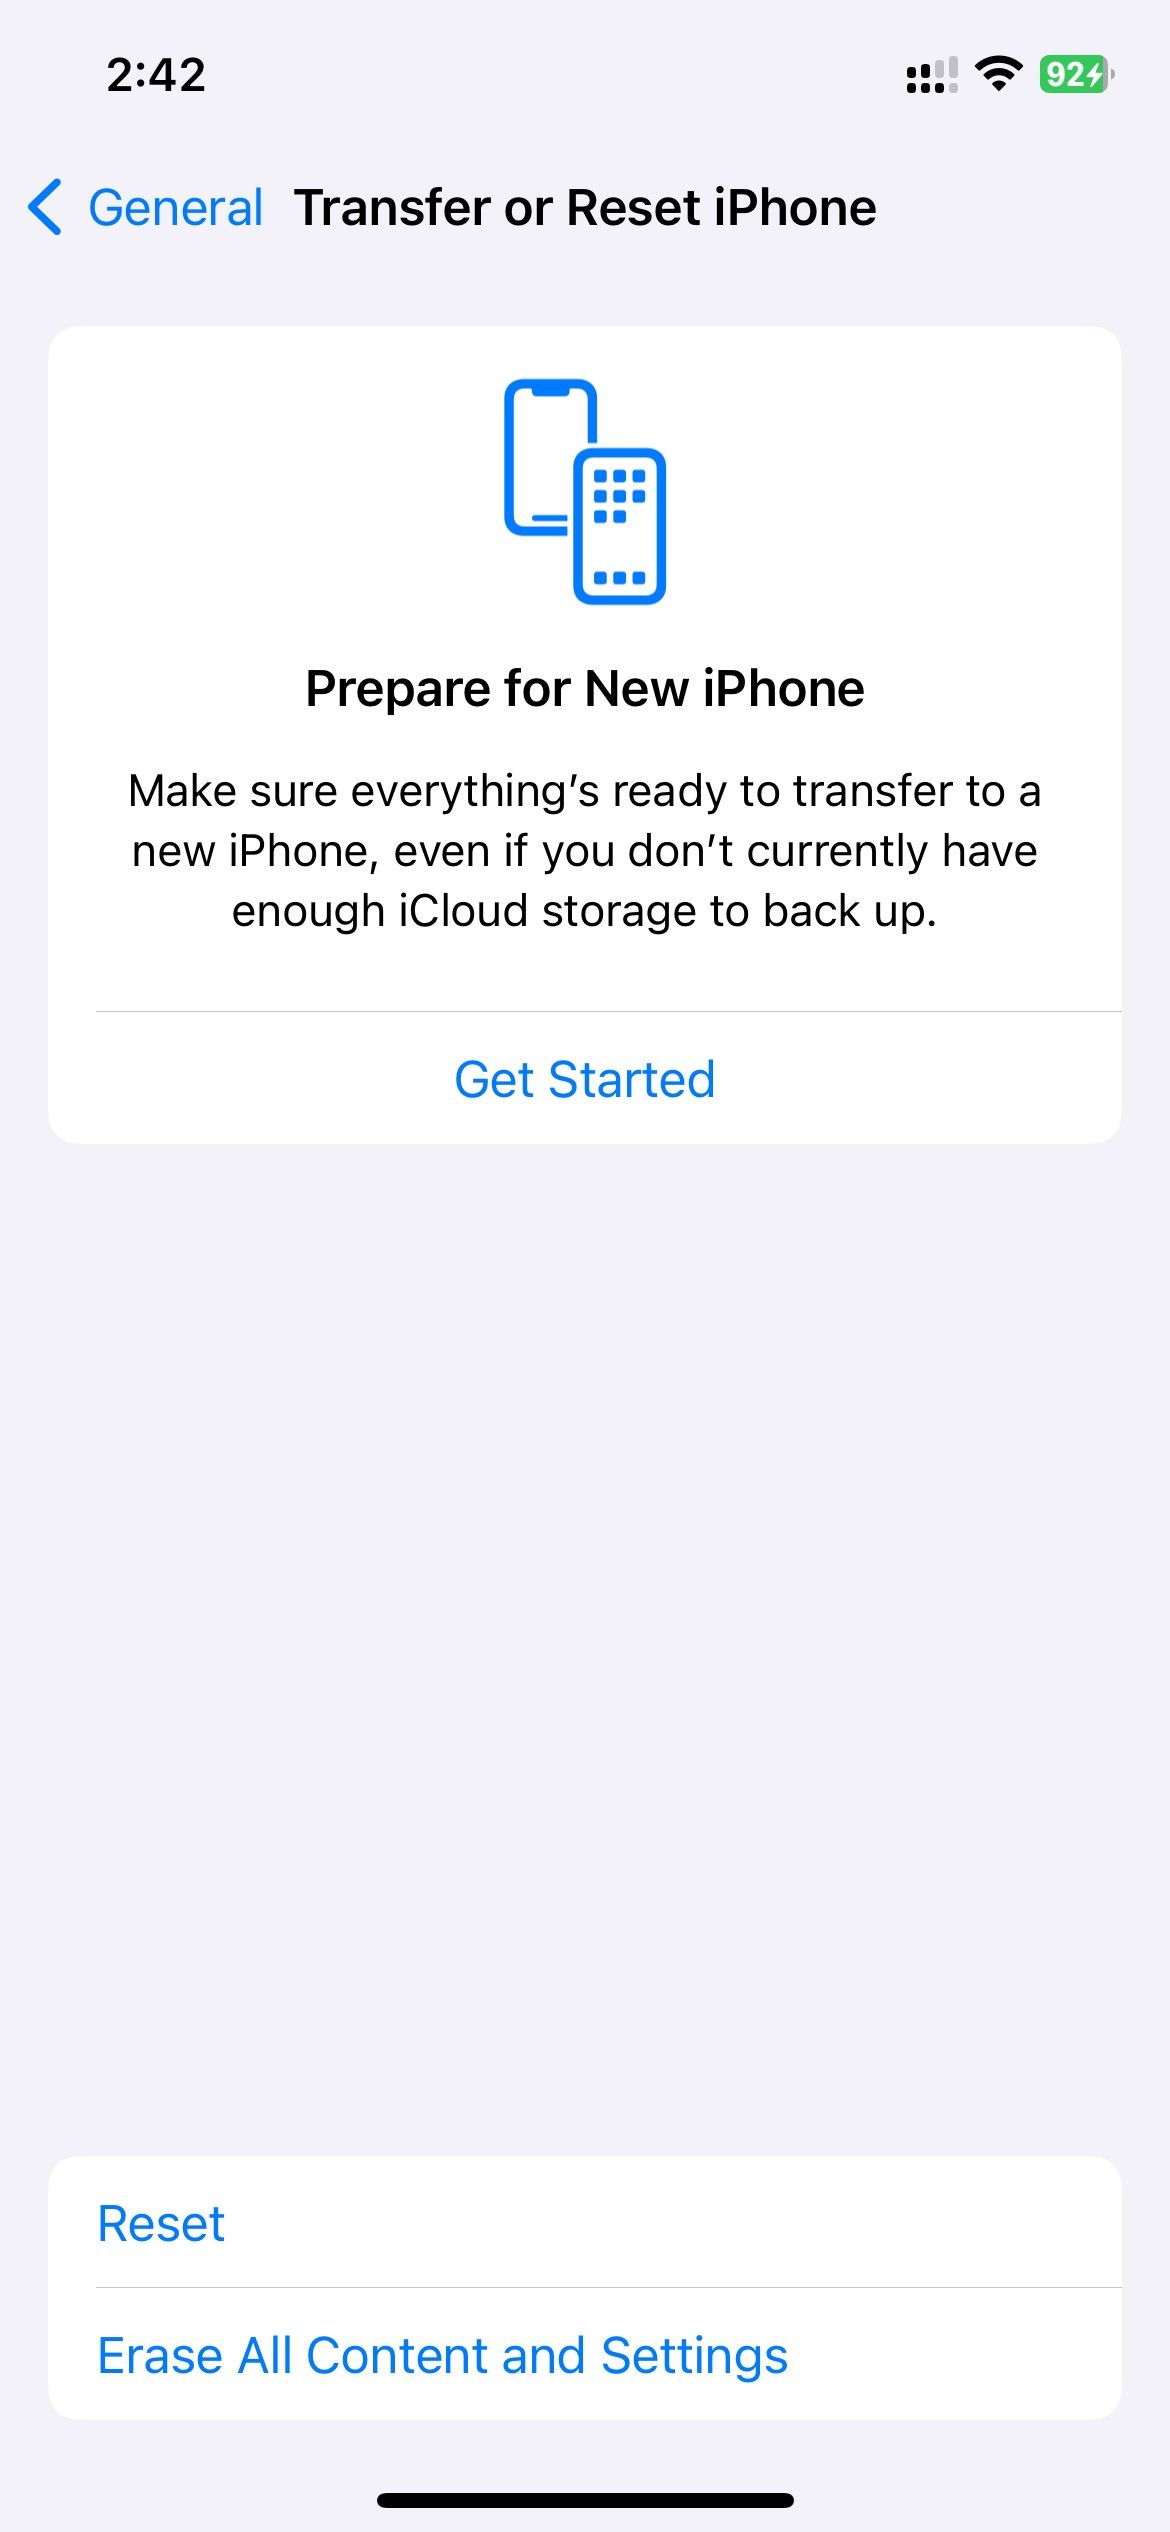 Transfer or Reset settings under General settings on iPhone